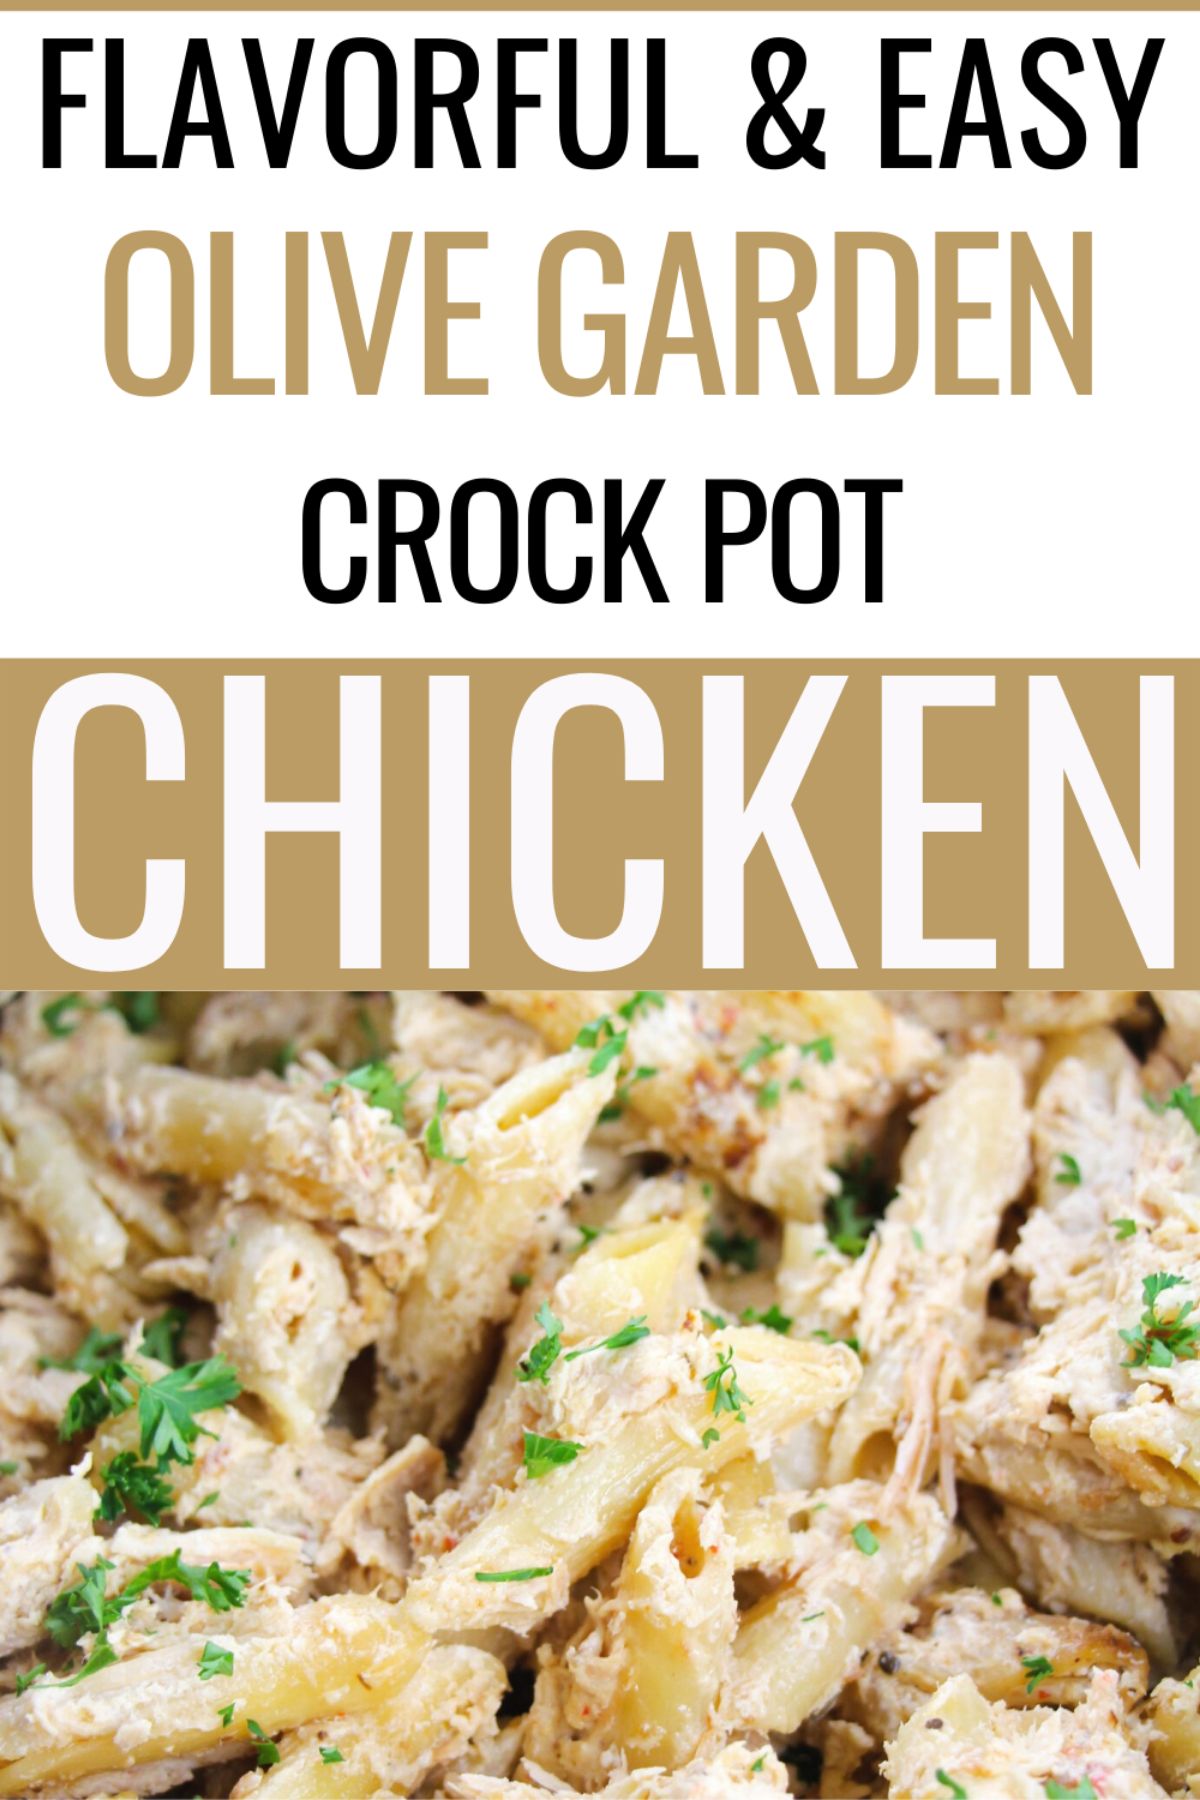 A close up shot of Olive Garden Crock Pot Chicken with a text at the upper half of the image saying "Flavorful & Easy Olive Garden Crock Pot Chicken".